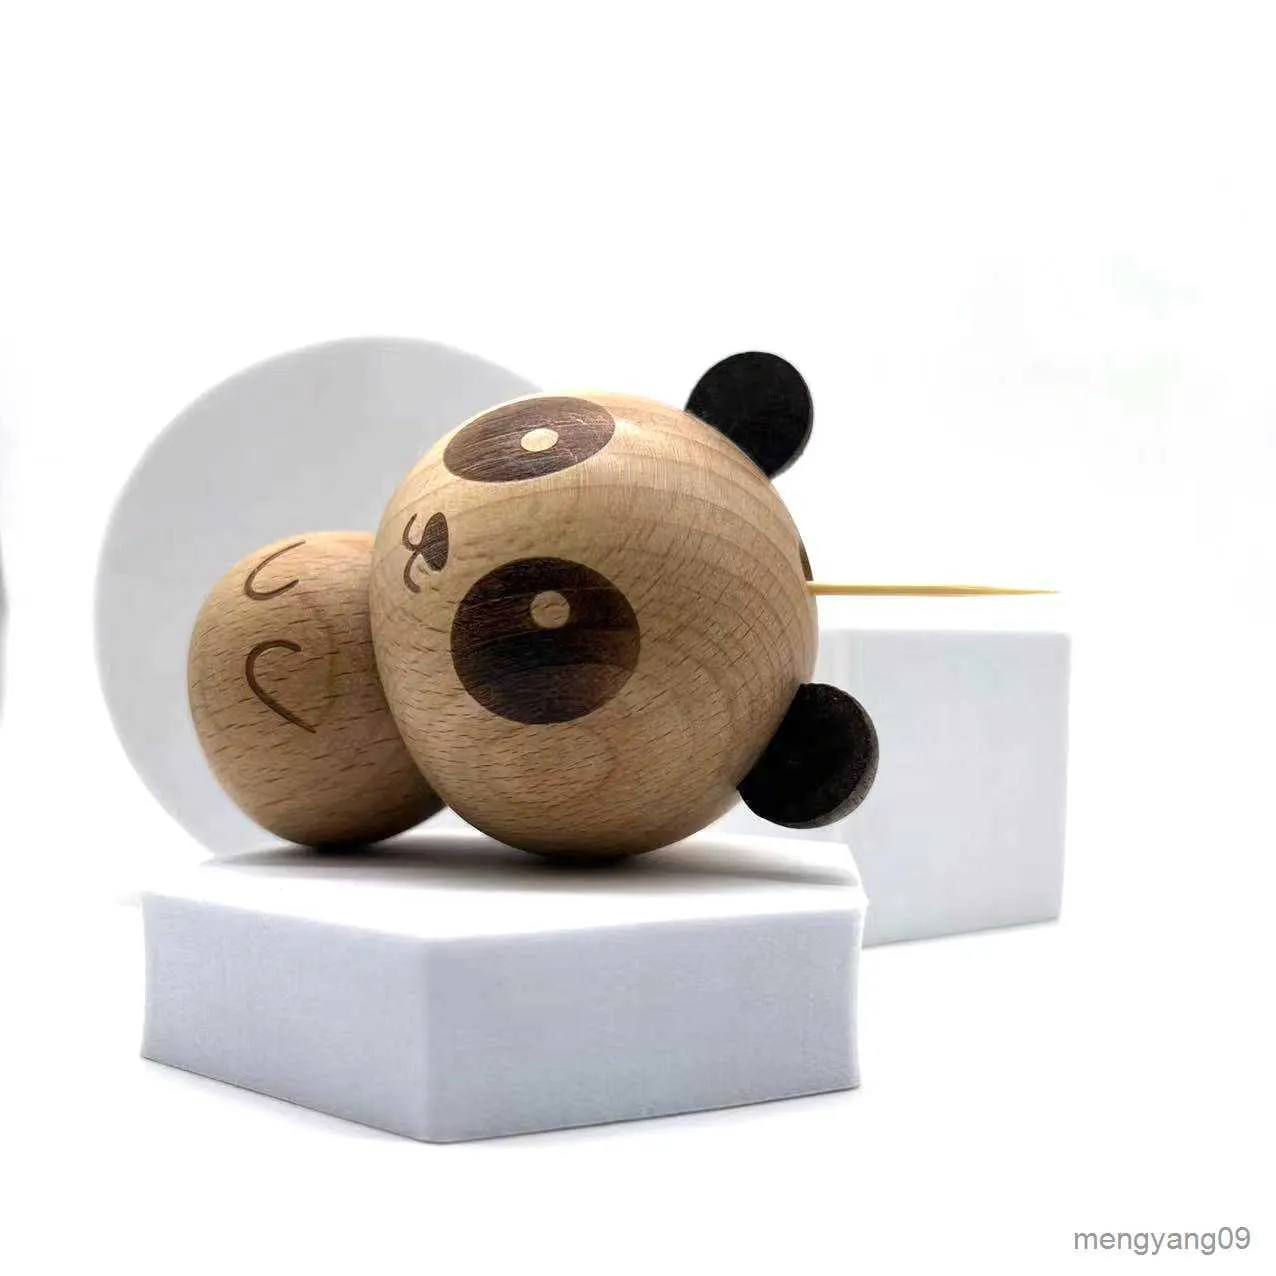 2pcs Toothpick Holders Toothpick Holder Dispenser Wooden Cute Panda Animal Tooth Pick Dispenser Toothpicks Storage Box Container for Kitchen Restaurant R230802